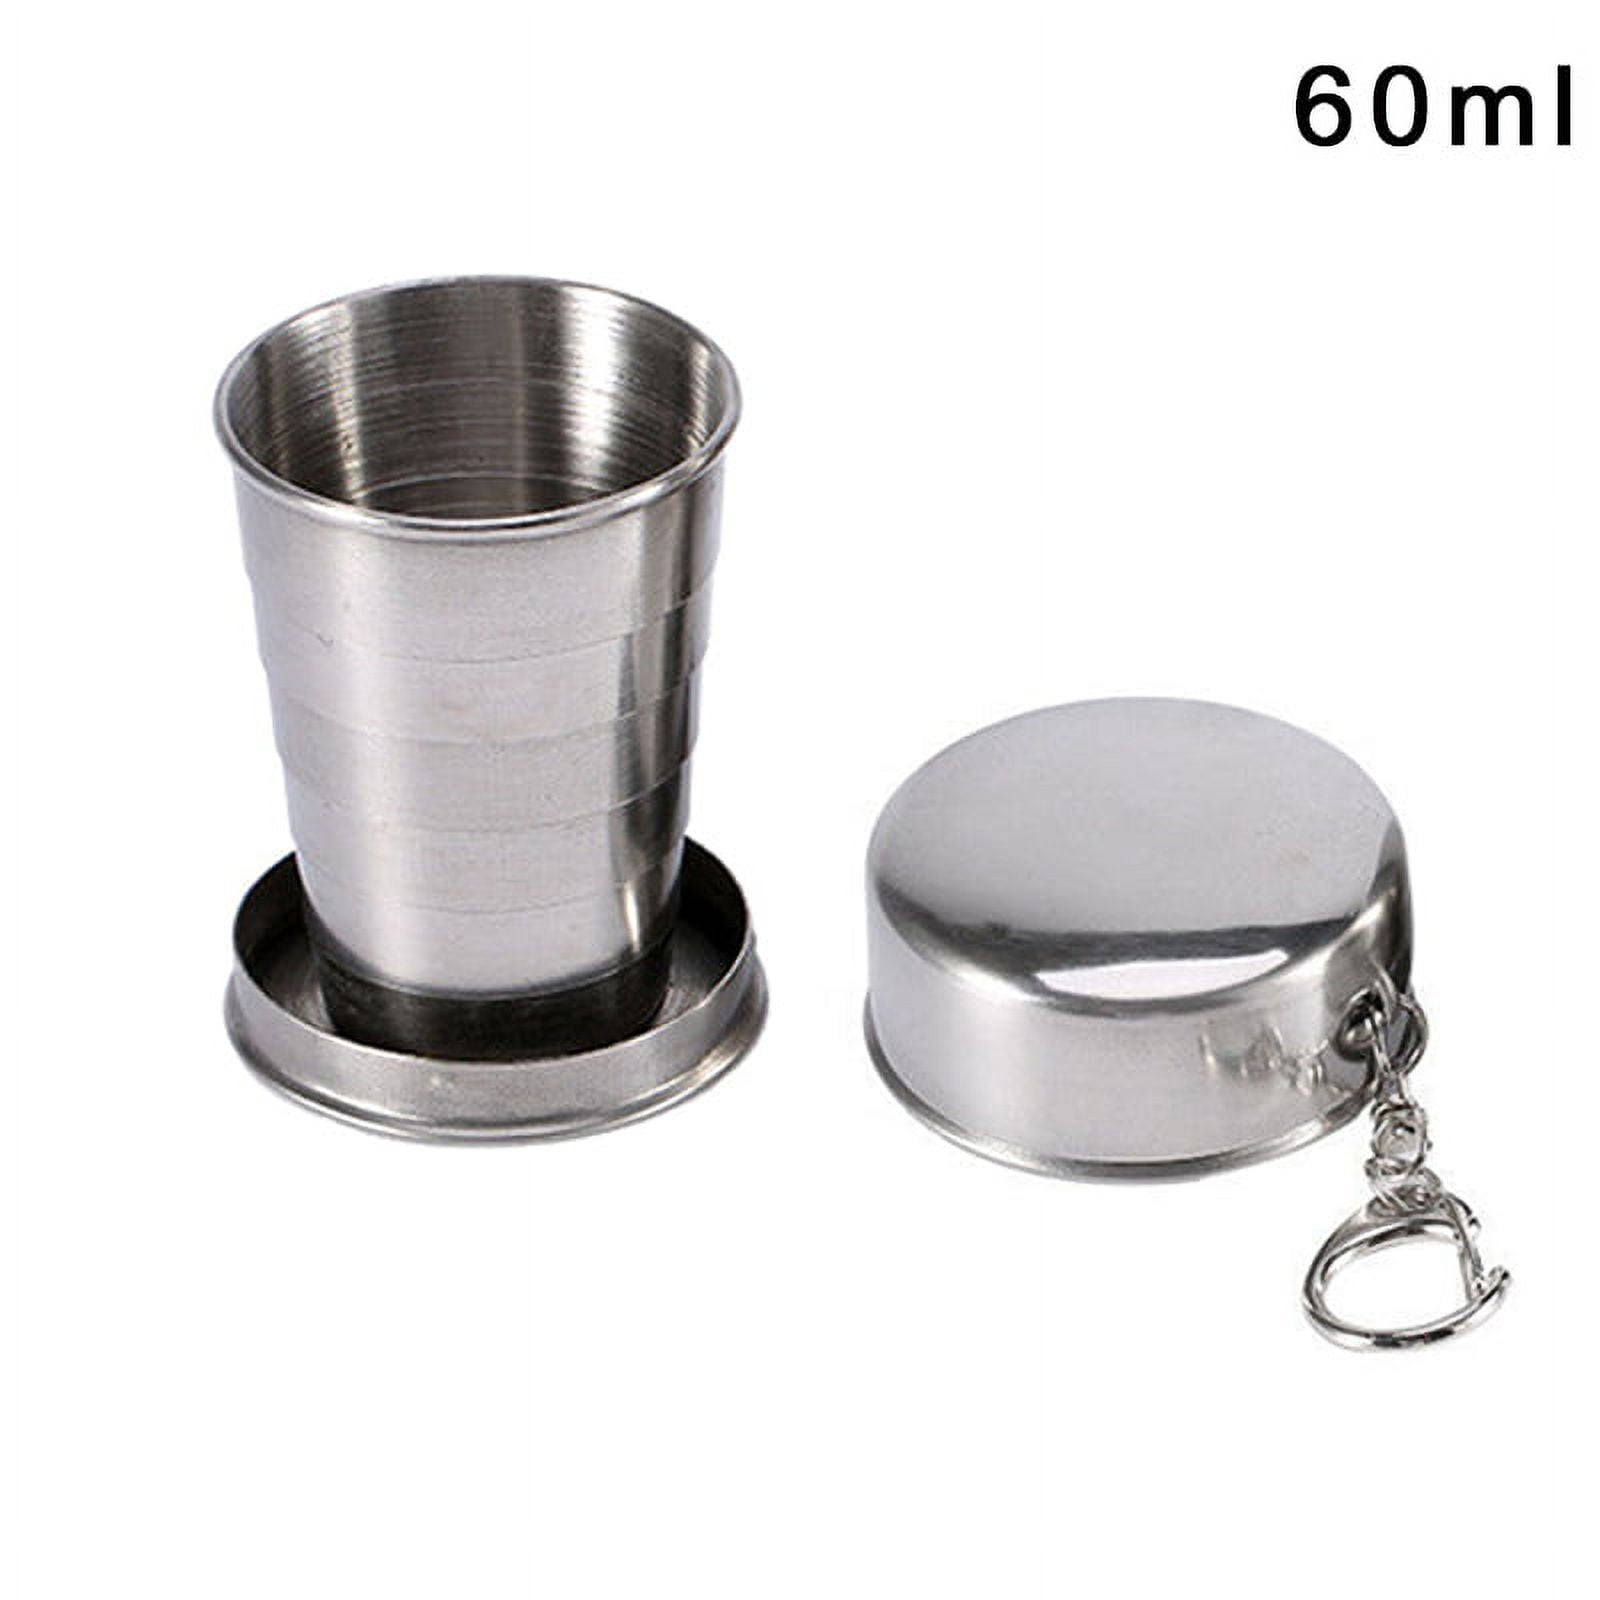 Engravable 2 oz. Stainless Steel Collapsible Cup